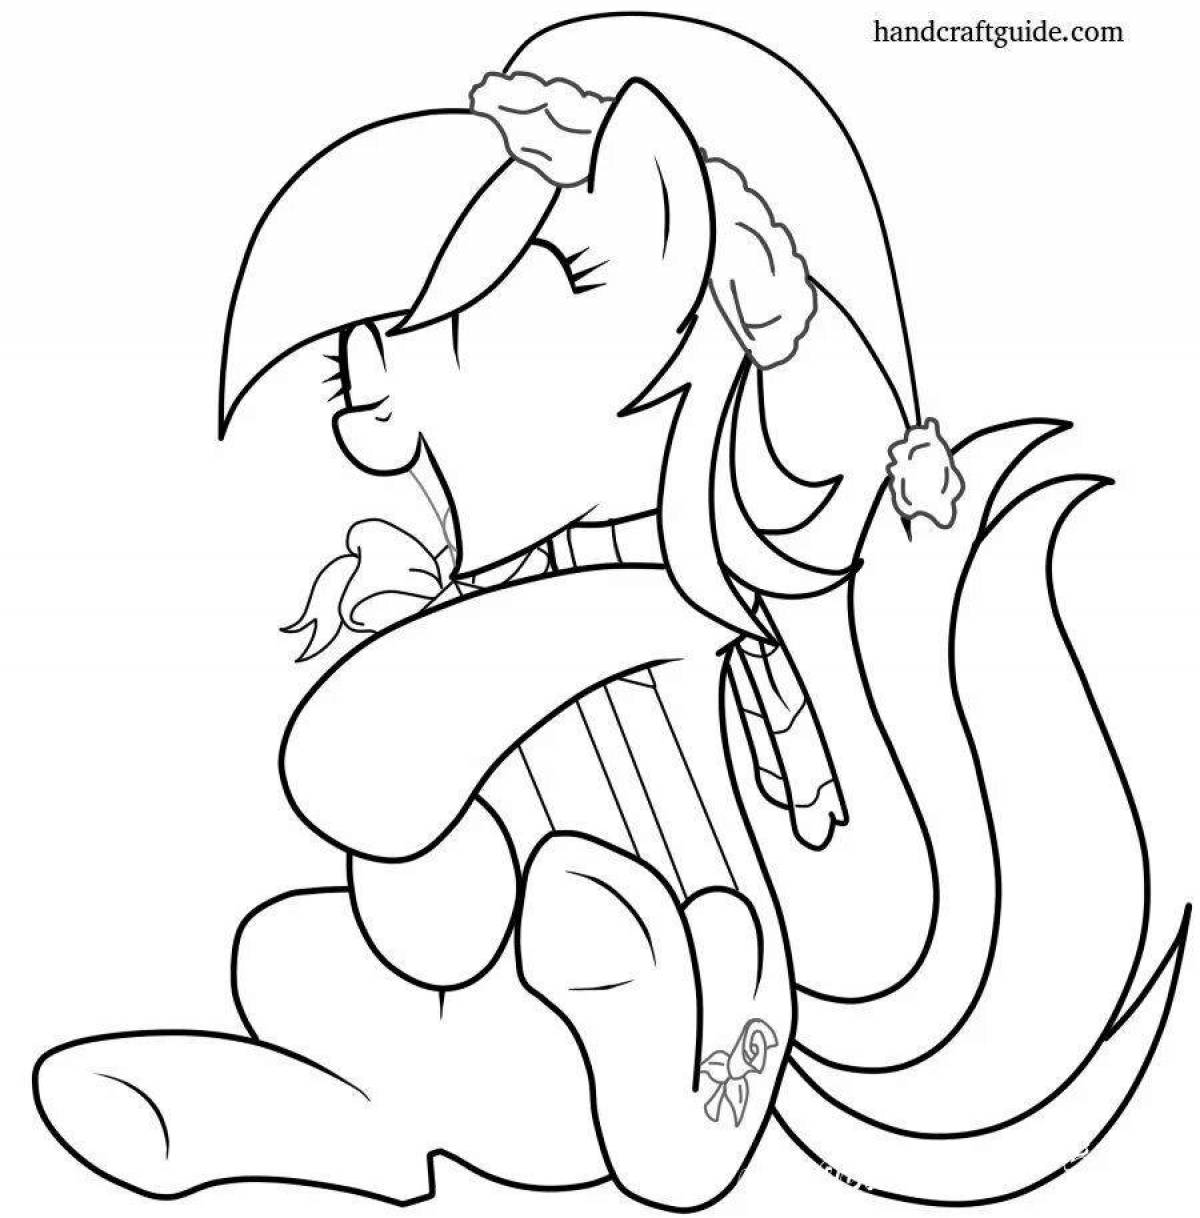 Great pony game time coloring page